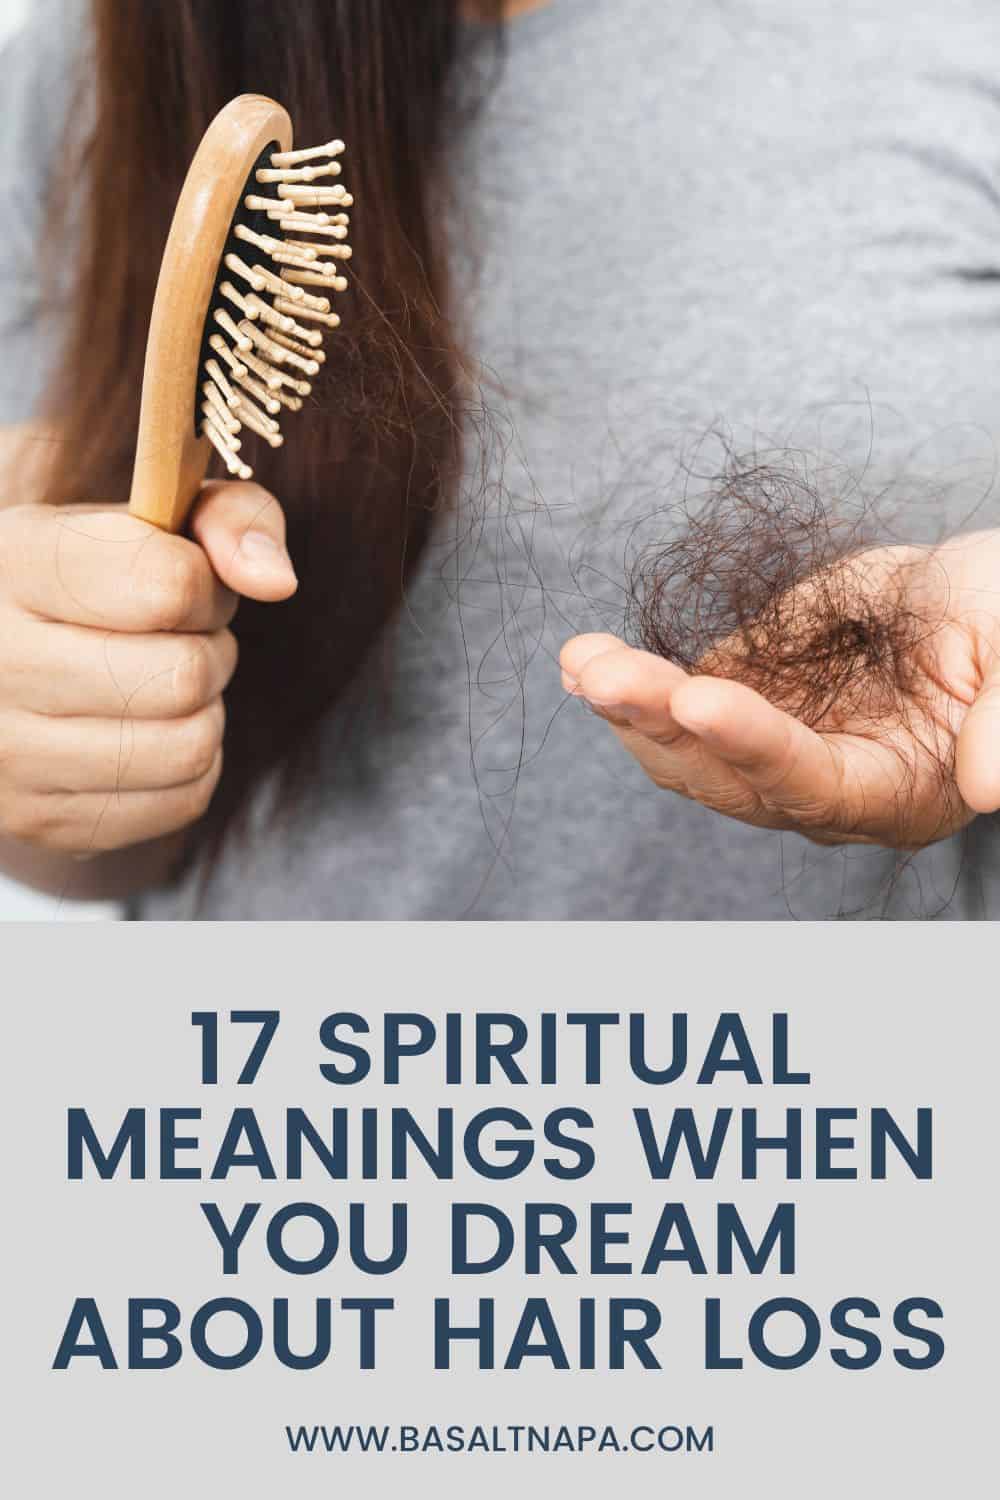 17 Spiritual Meanings When You Dream About Hair Loss